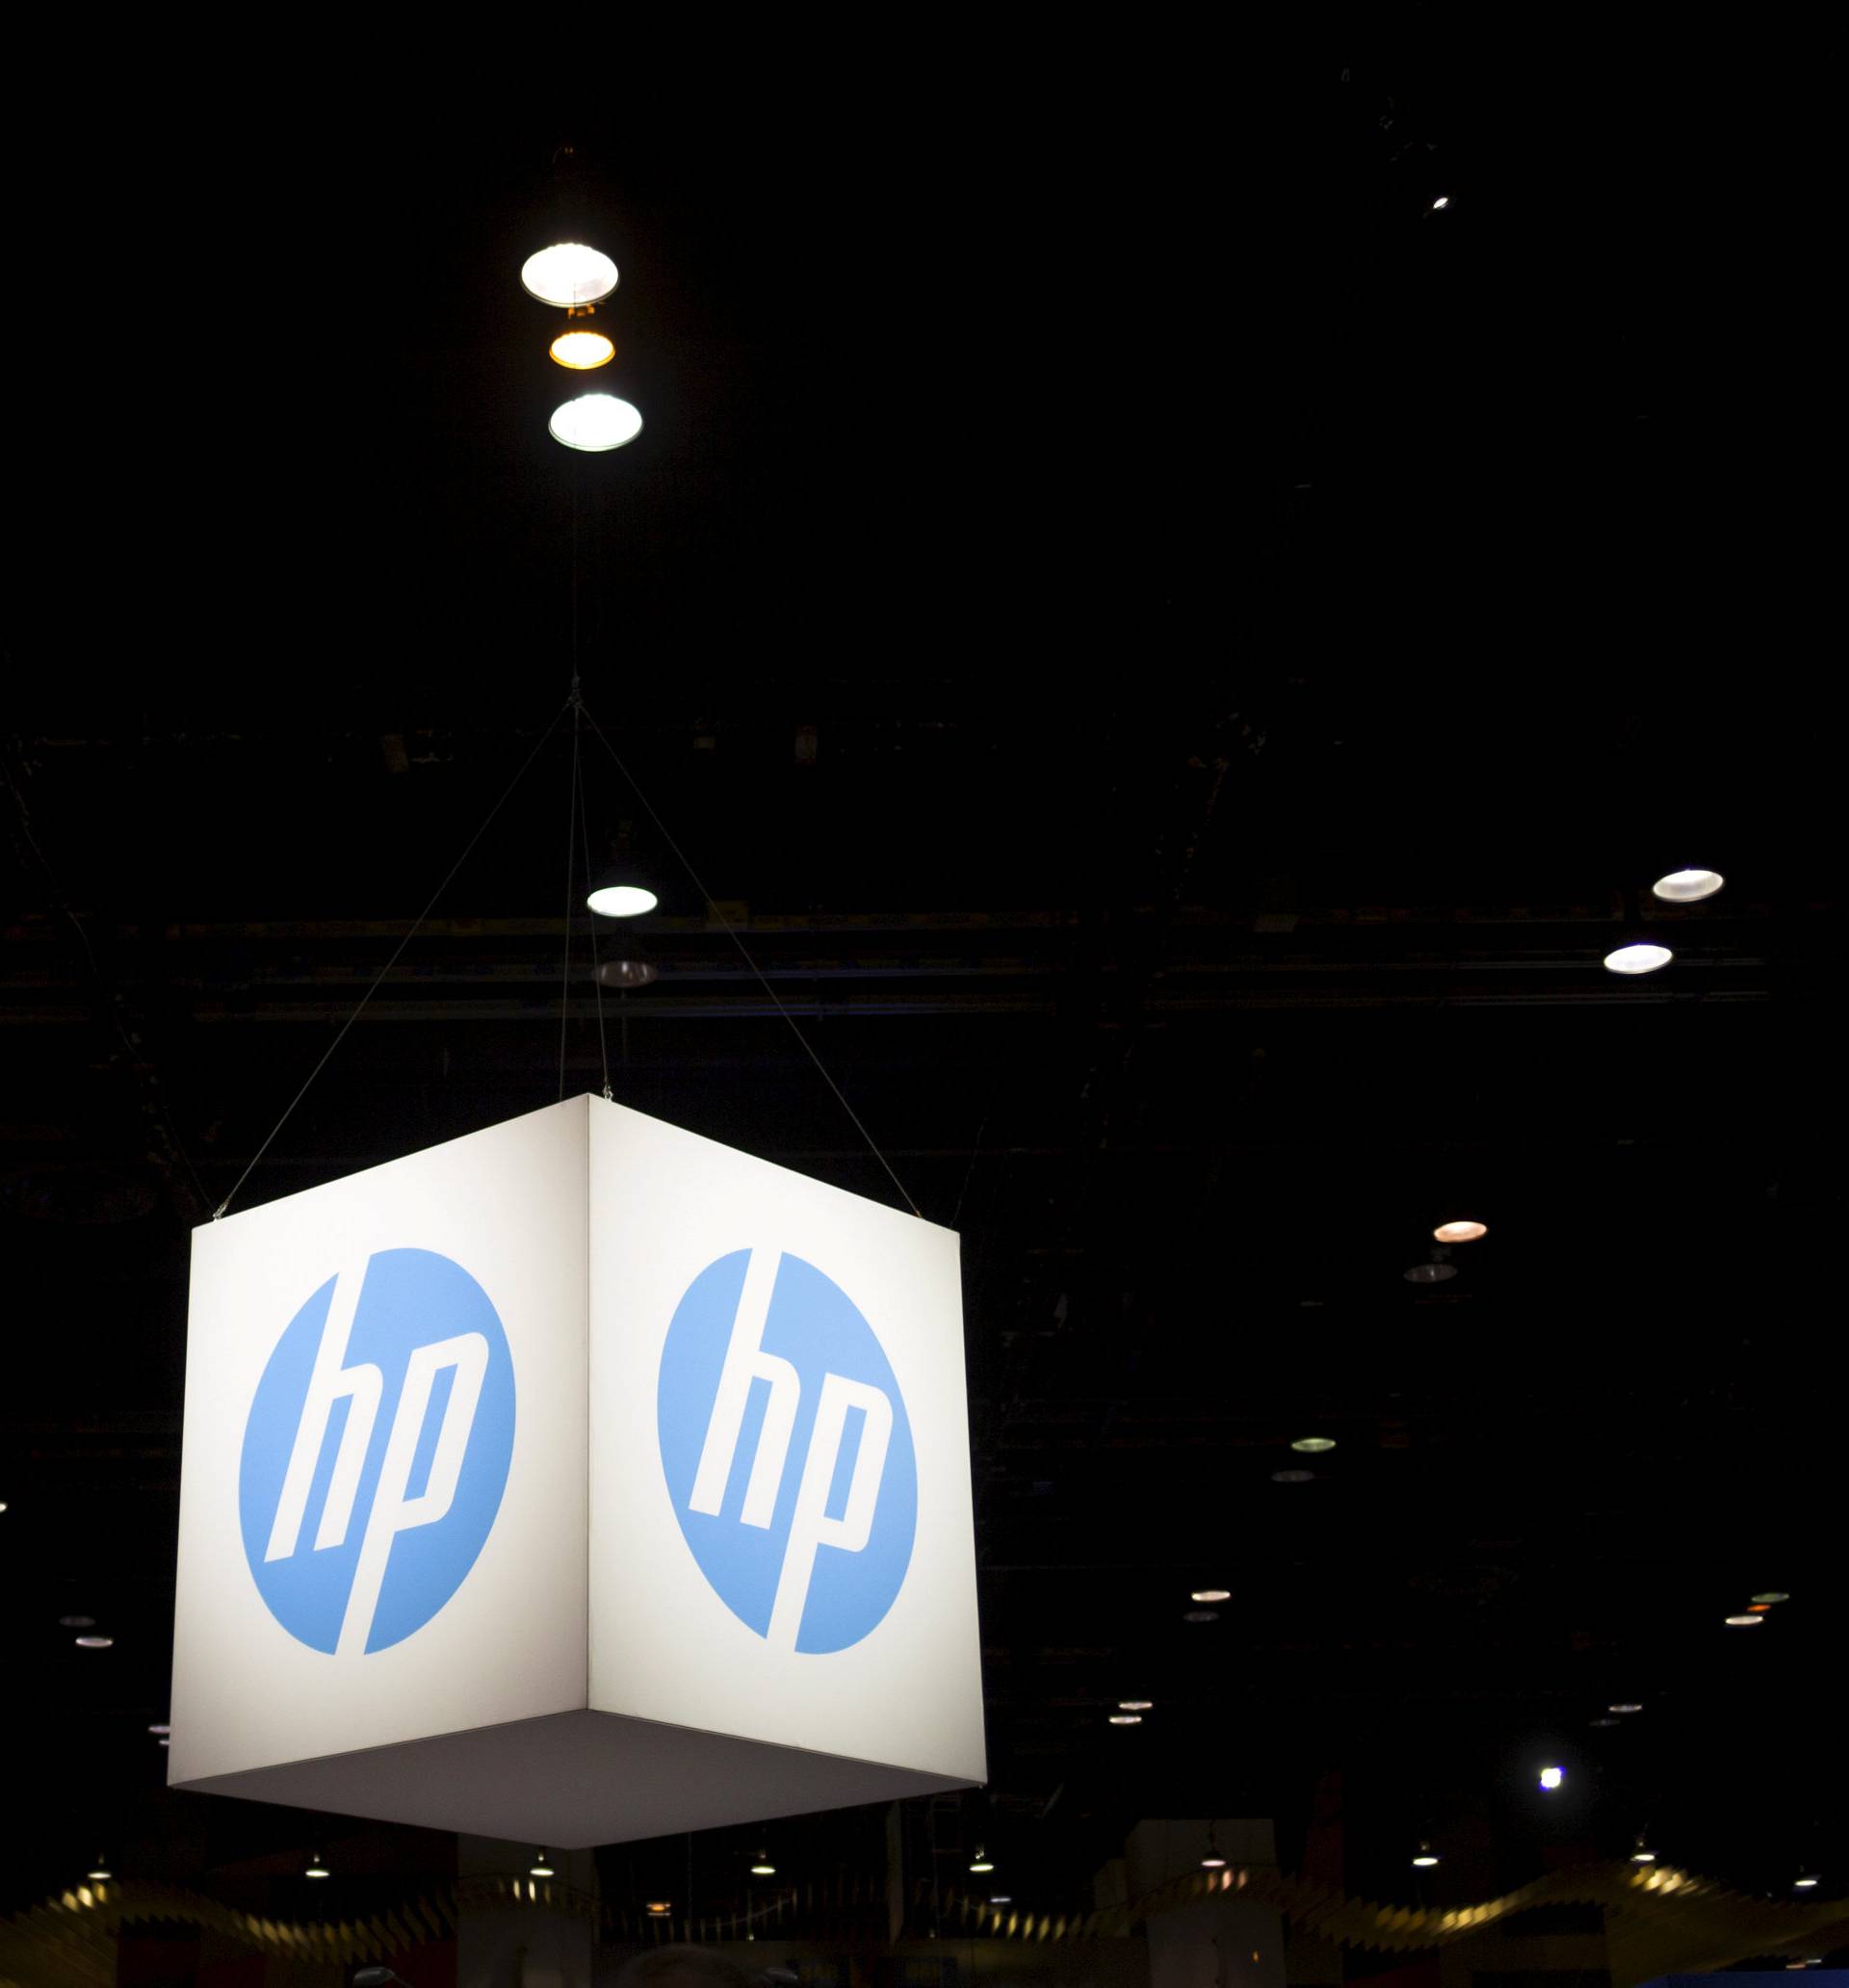 The Hewlett-Packard (HP) logo is seen as part of a display at the Microsoft Ignite technology conference in Chicago